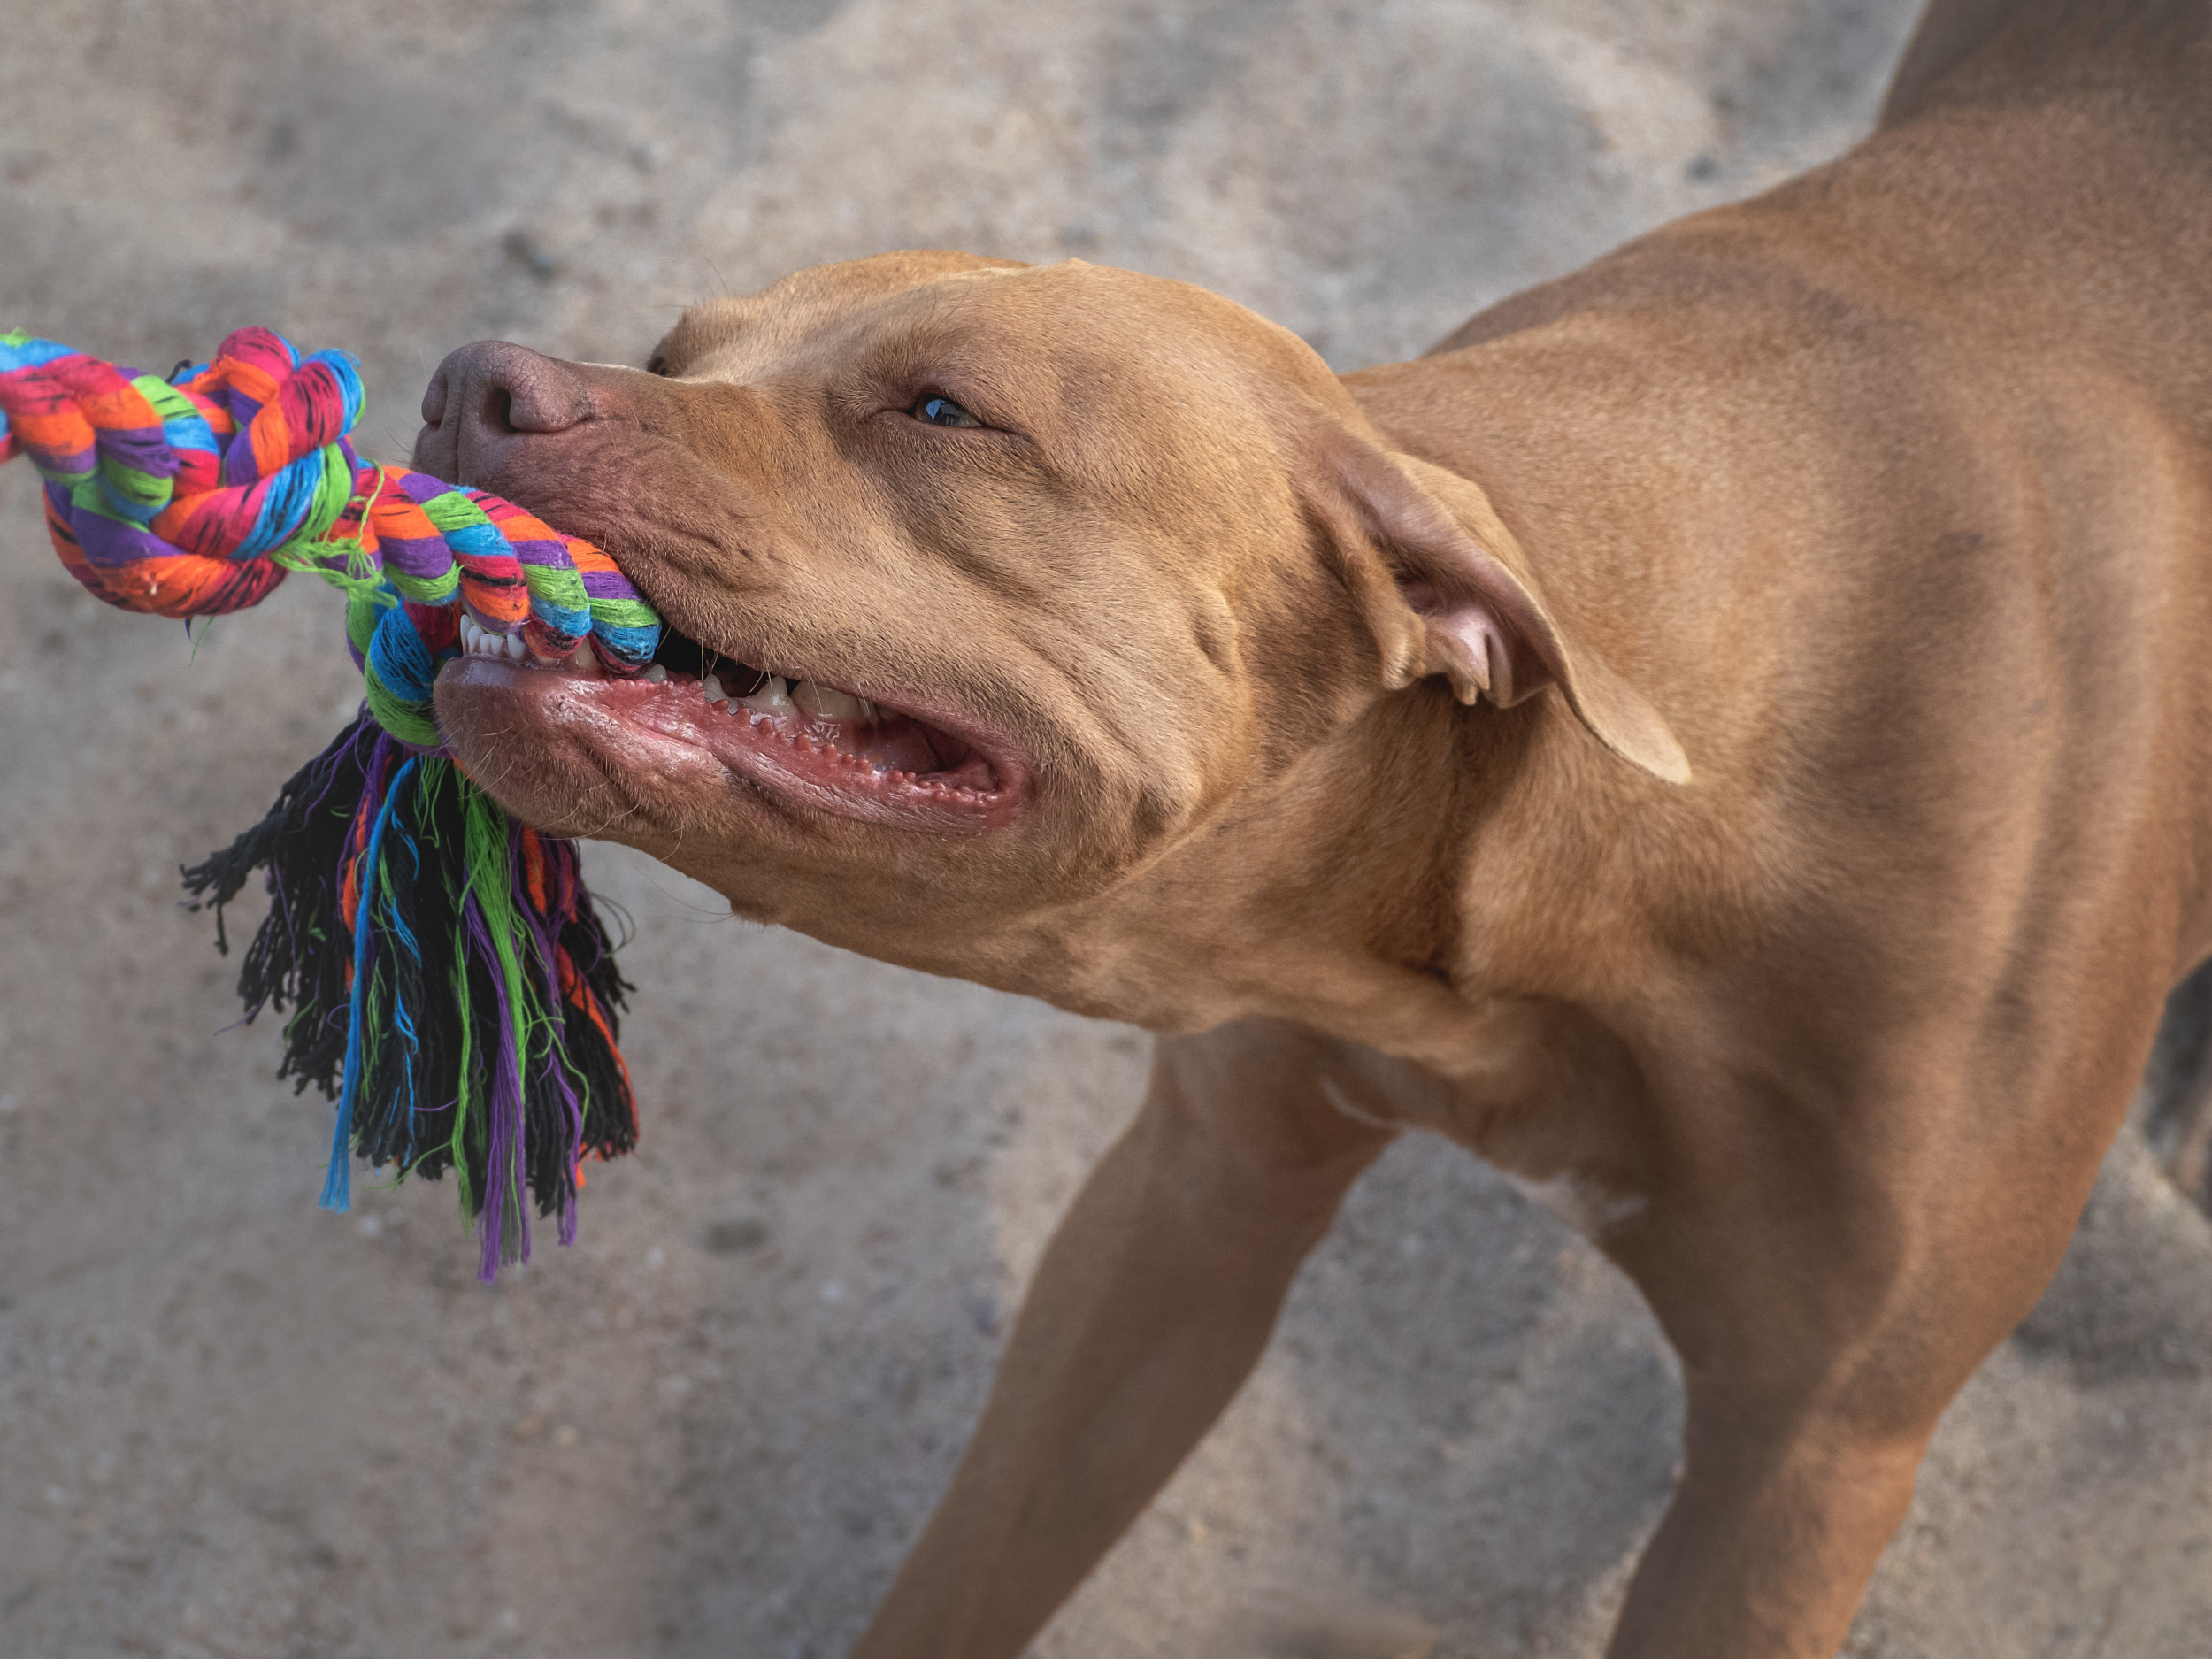 Watch adorable moment man gives 80 street dogs toys for first time